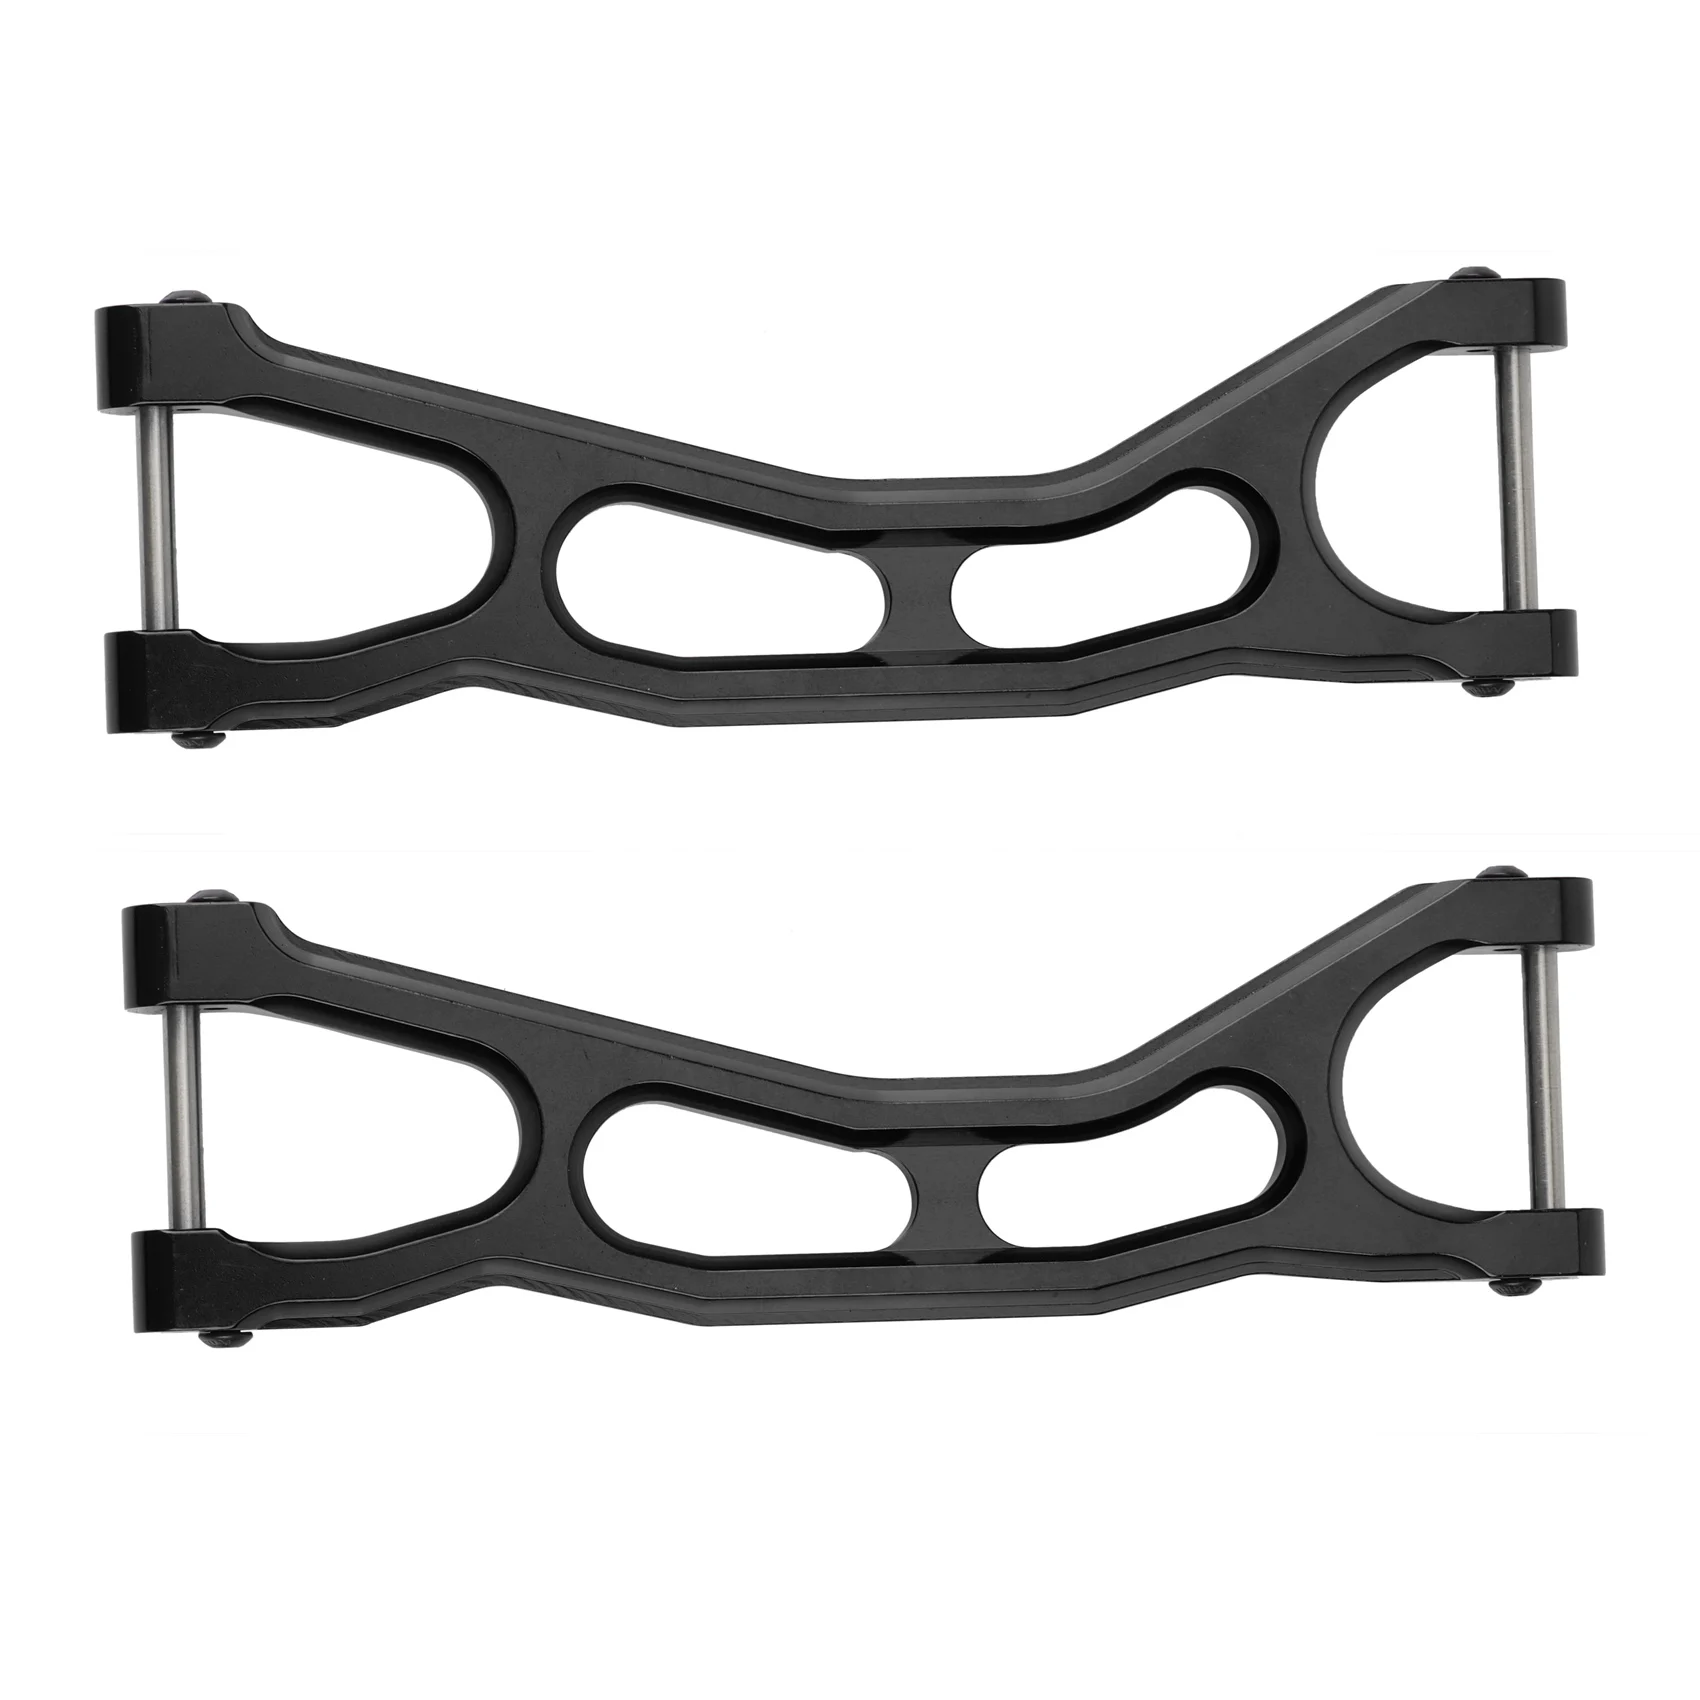 

2Pcs Metal Front Rear Upper Suspension Arms for Traxxas X-Maxx XMAXX 6S 8S 1/5 RC Car Upgrade Parts,2